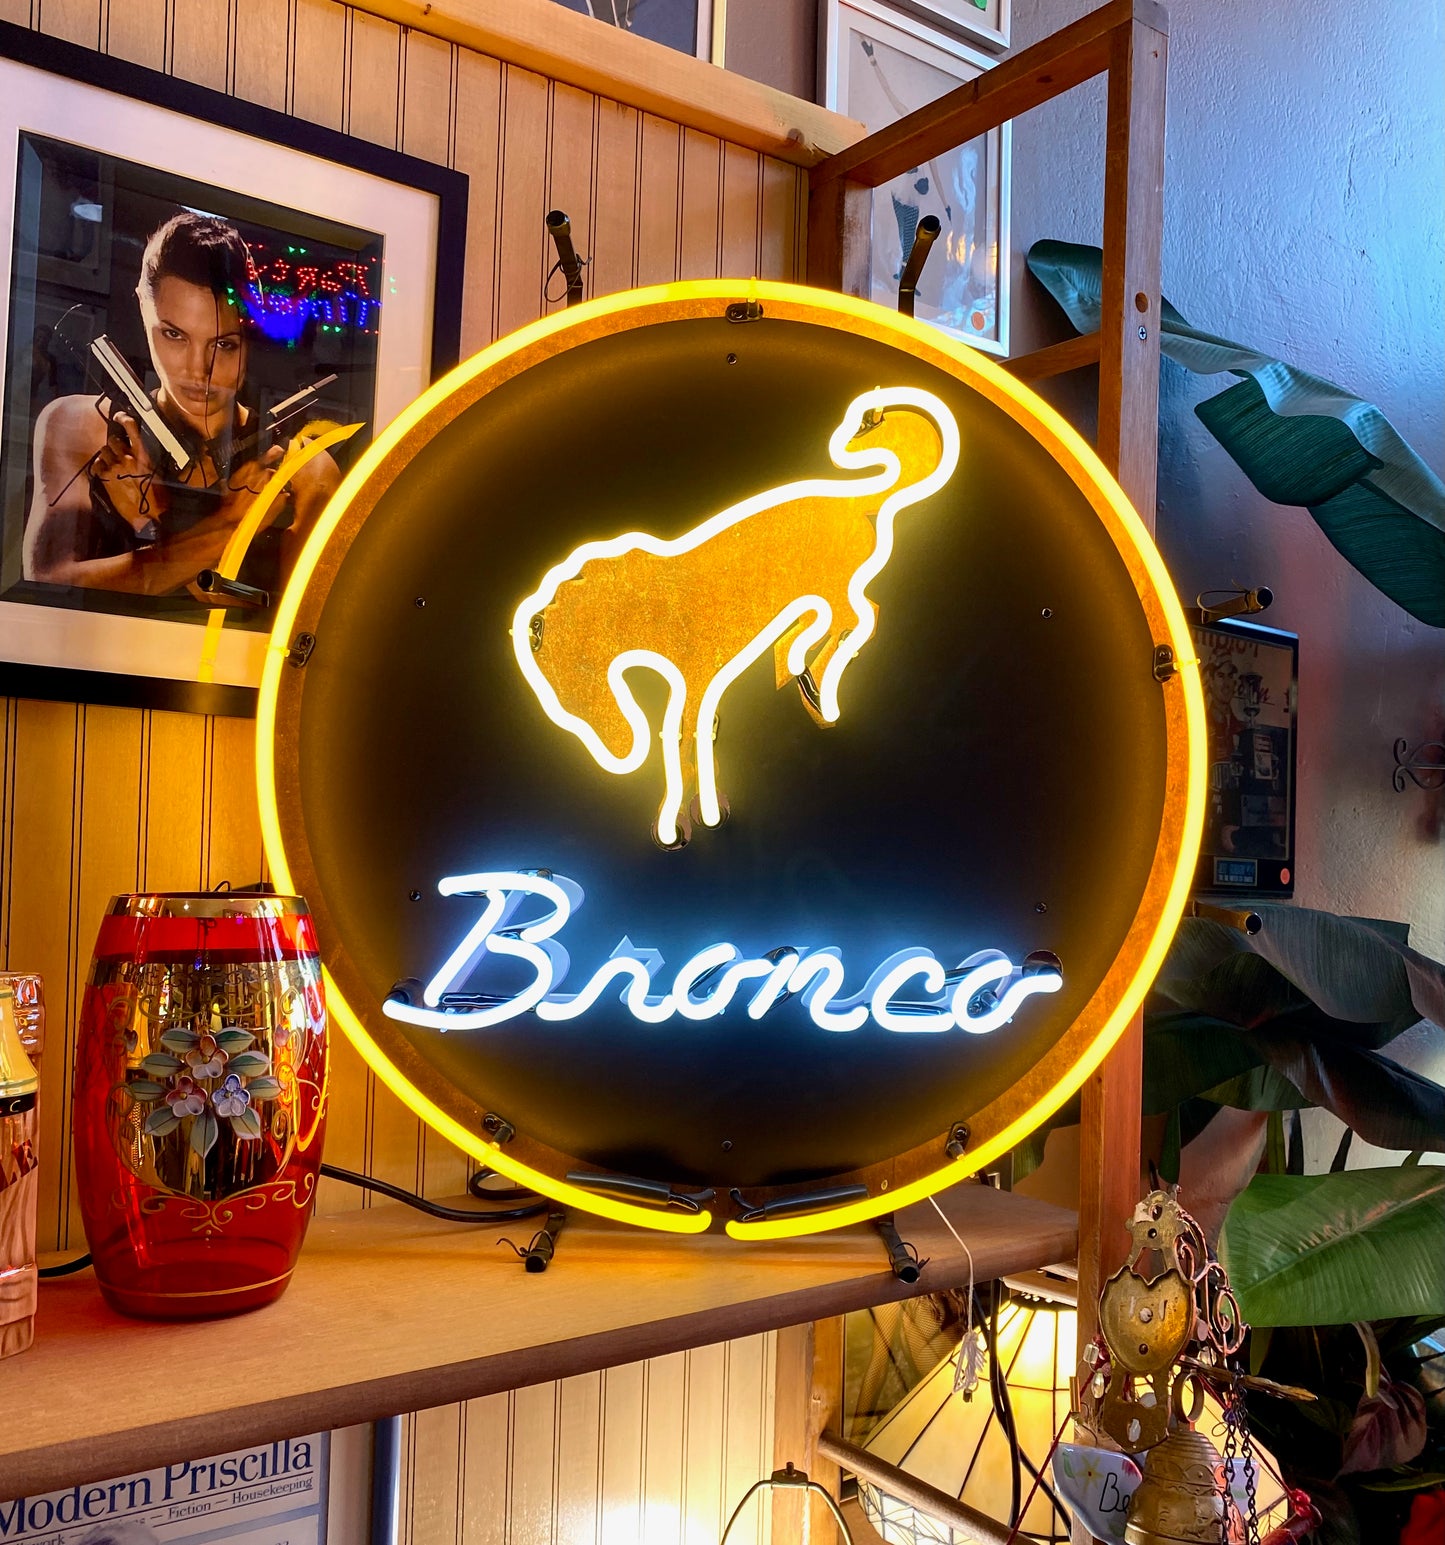 Bronco Standard Neon Sign *LOCAL PICKUP ONLY*